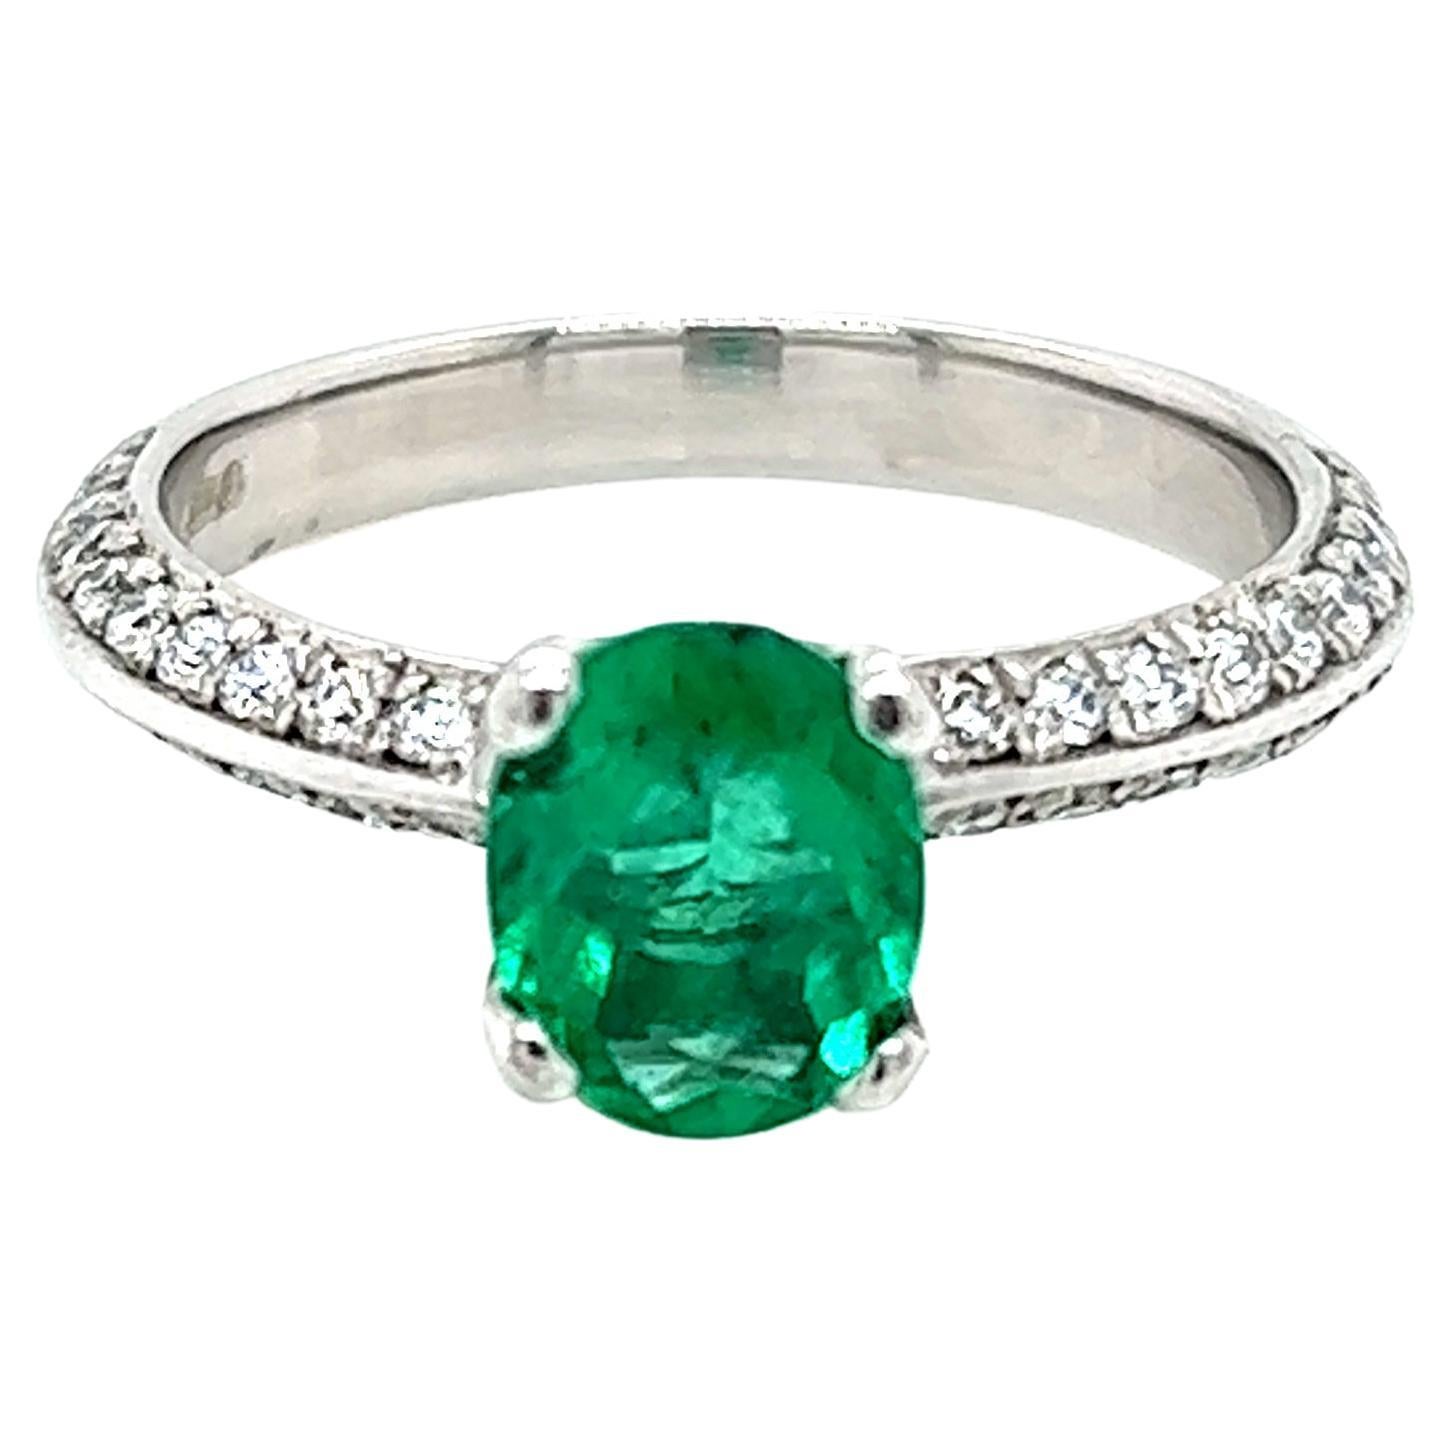 0.99 Carat Oval Emerald and Diamond Ring in Platinum